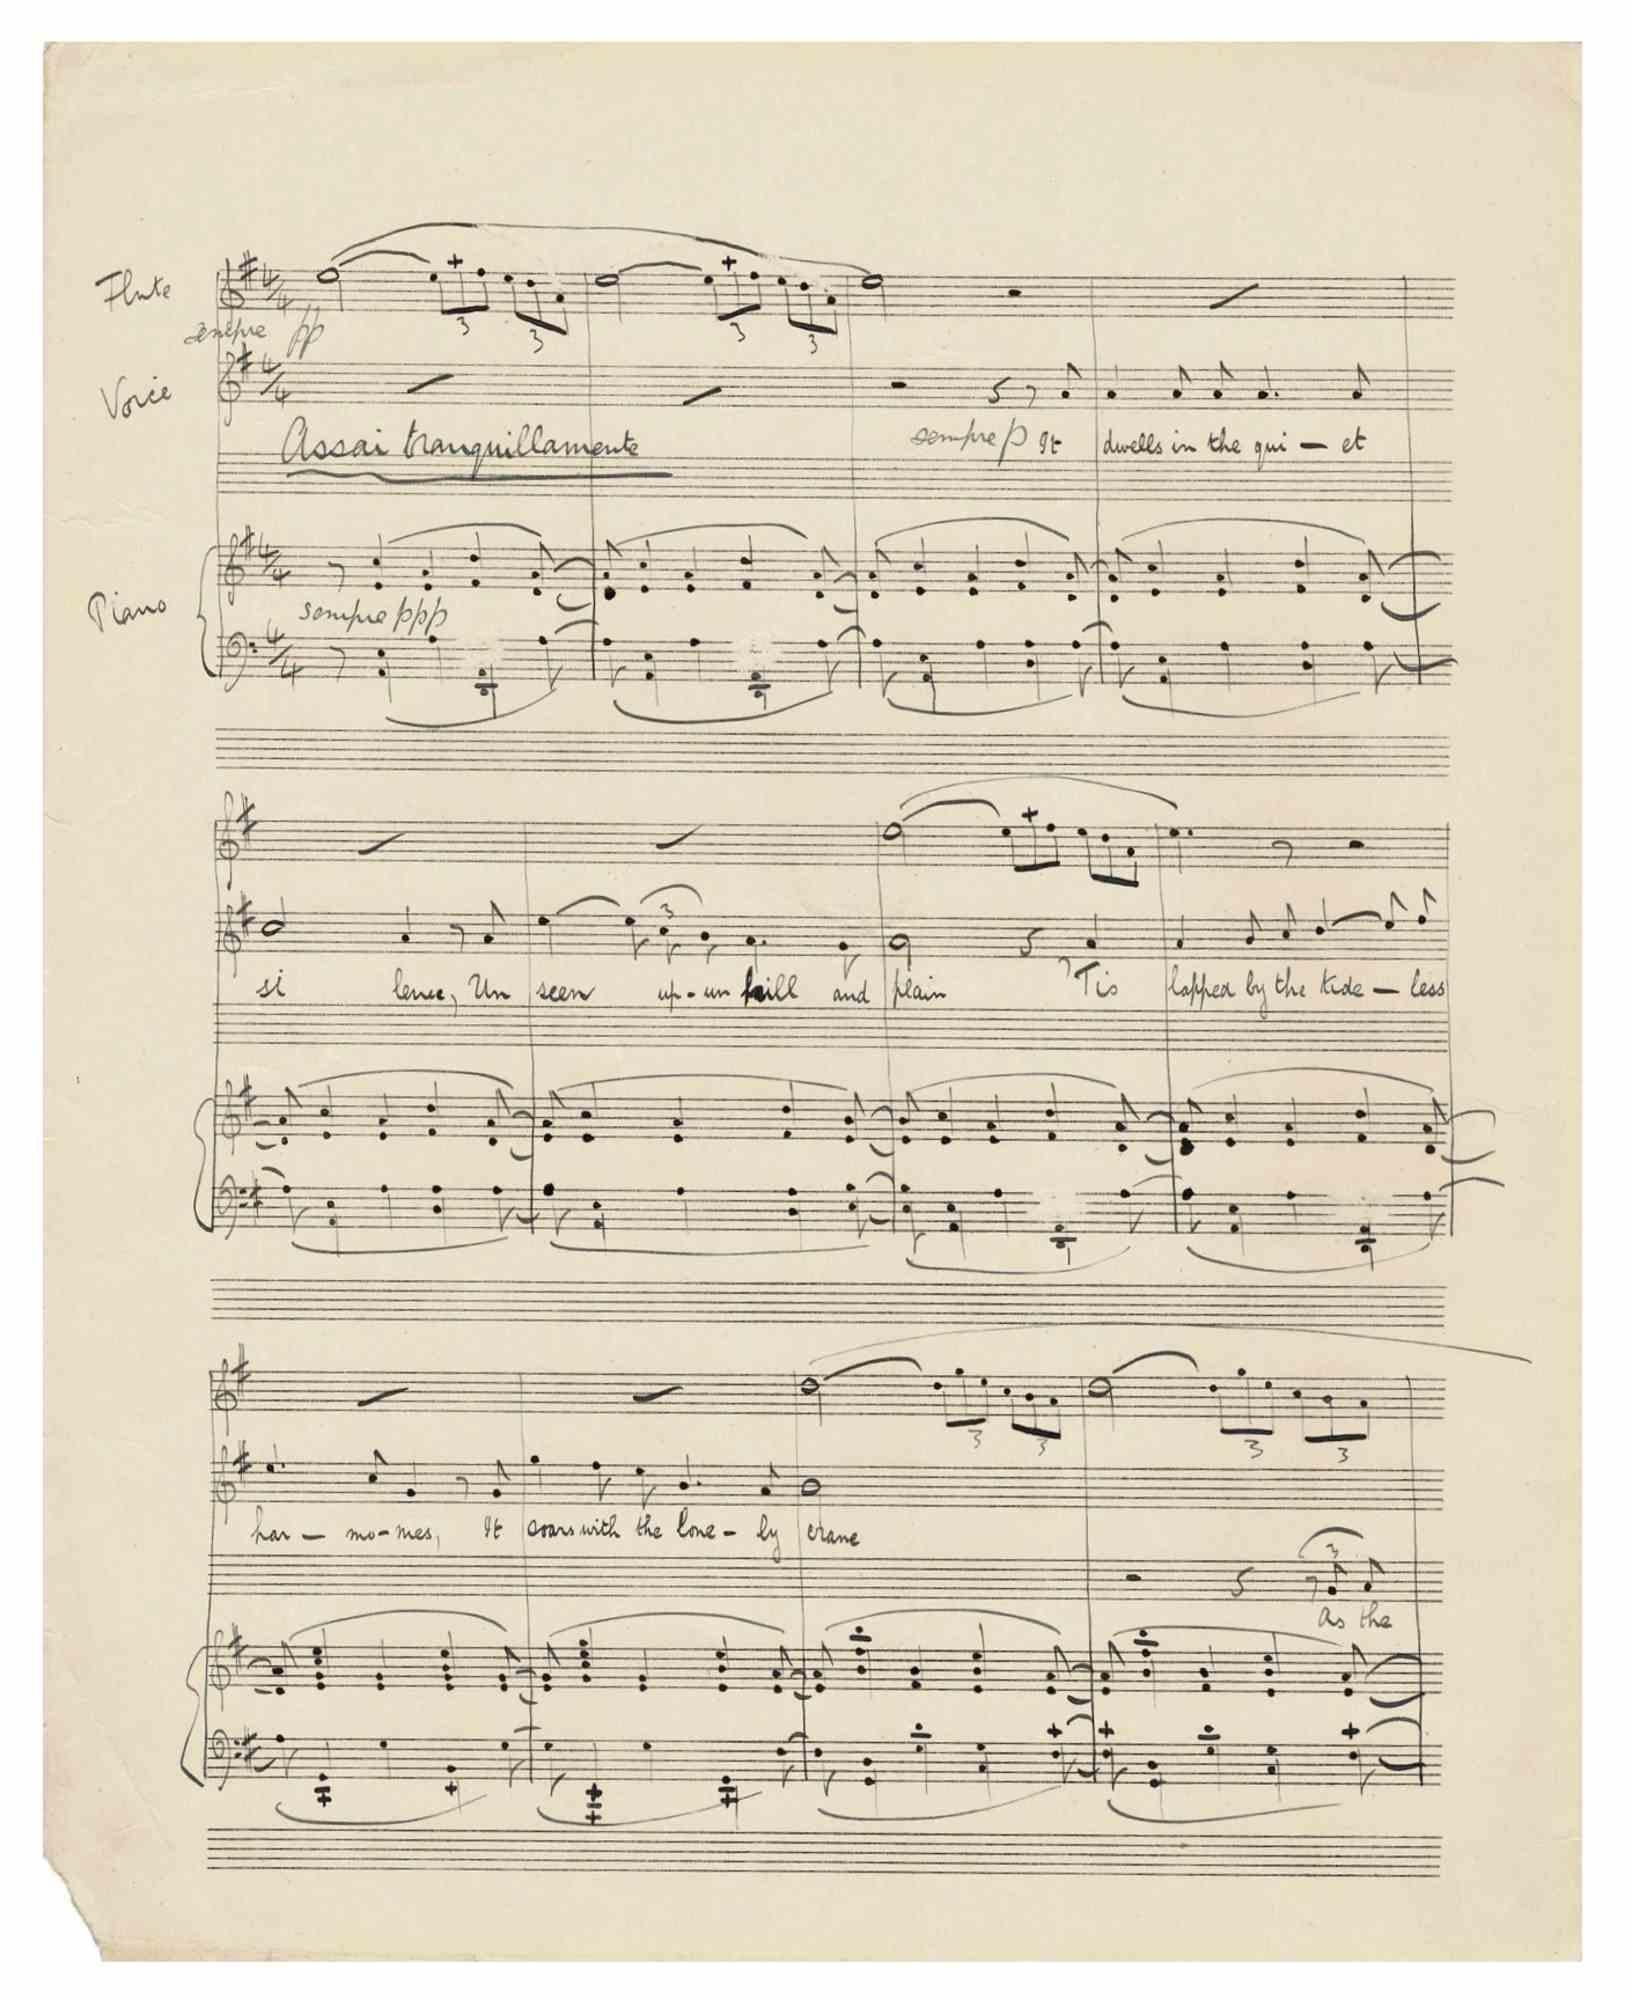 Autograph Music Score by the composer Fredrick Cramer titled "Tranquil Repose" from 1924. Song for High Voice, Pianoforte and Flute. Words rendered from the Chinese original Ssu-Kung-tu by L. Cranmer Byng [1872-1945] (...). Voice and Flure parts